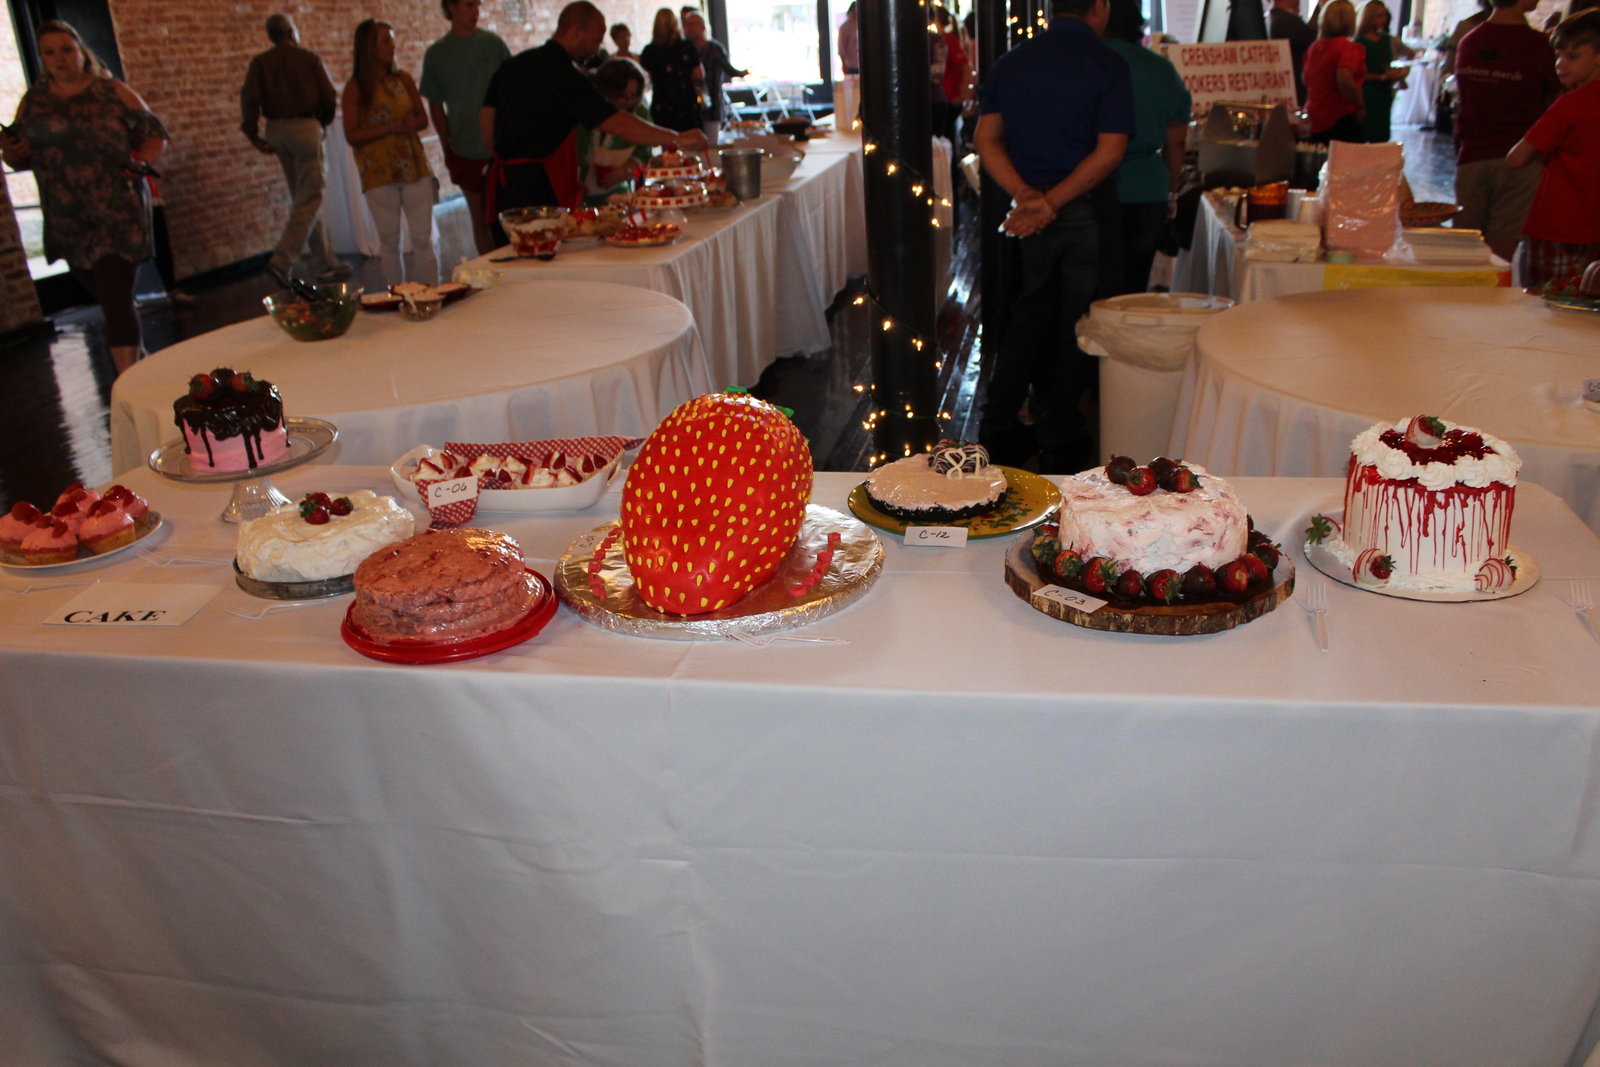 West Tennessee Strawberry Festival - Humboldt TN - Recipe Contest19